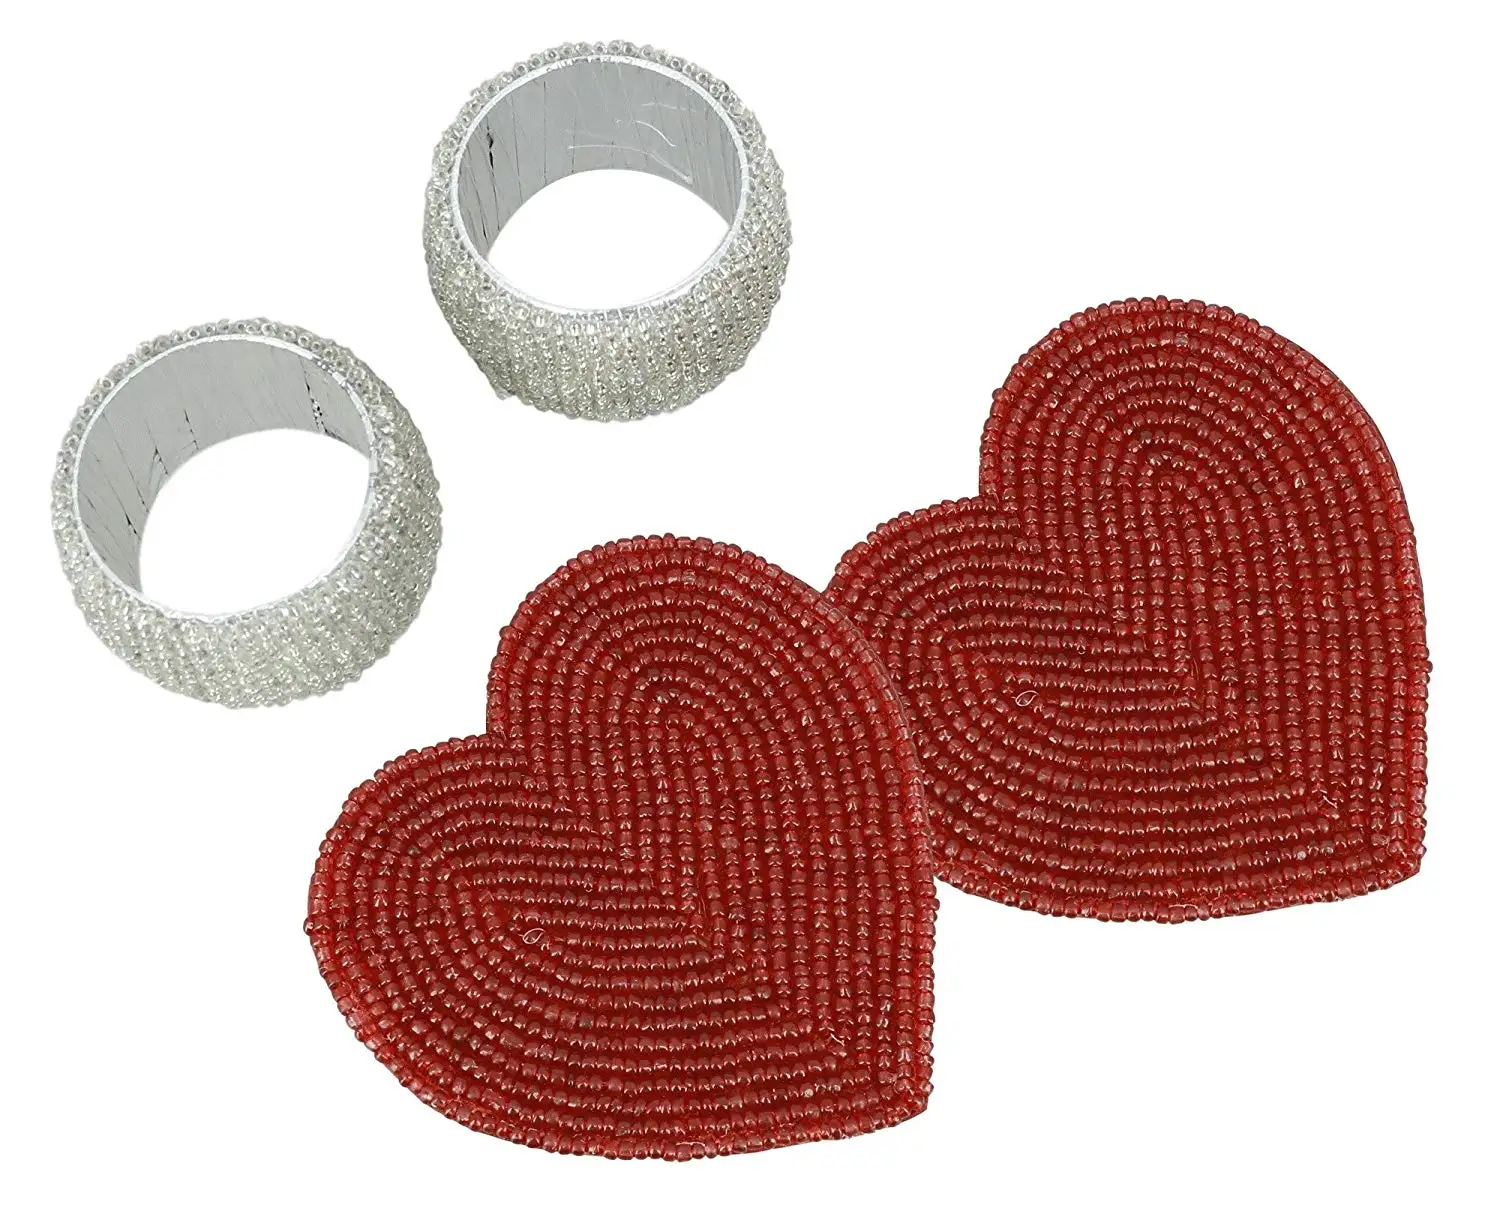 4 Coasters Handmade Beaded Heart Coaster Set With 6 Red Heat-Resistant Polyester Backing /& Genuine Glass Beads